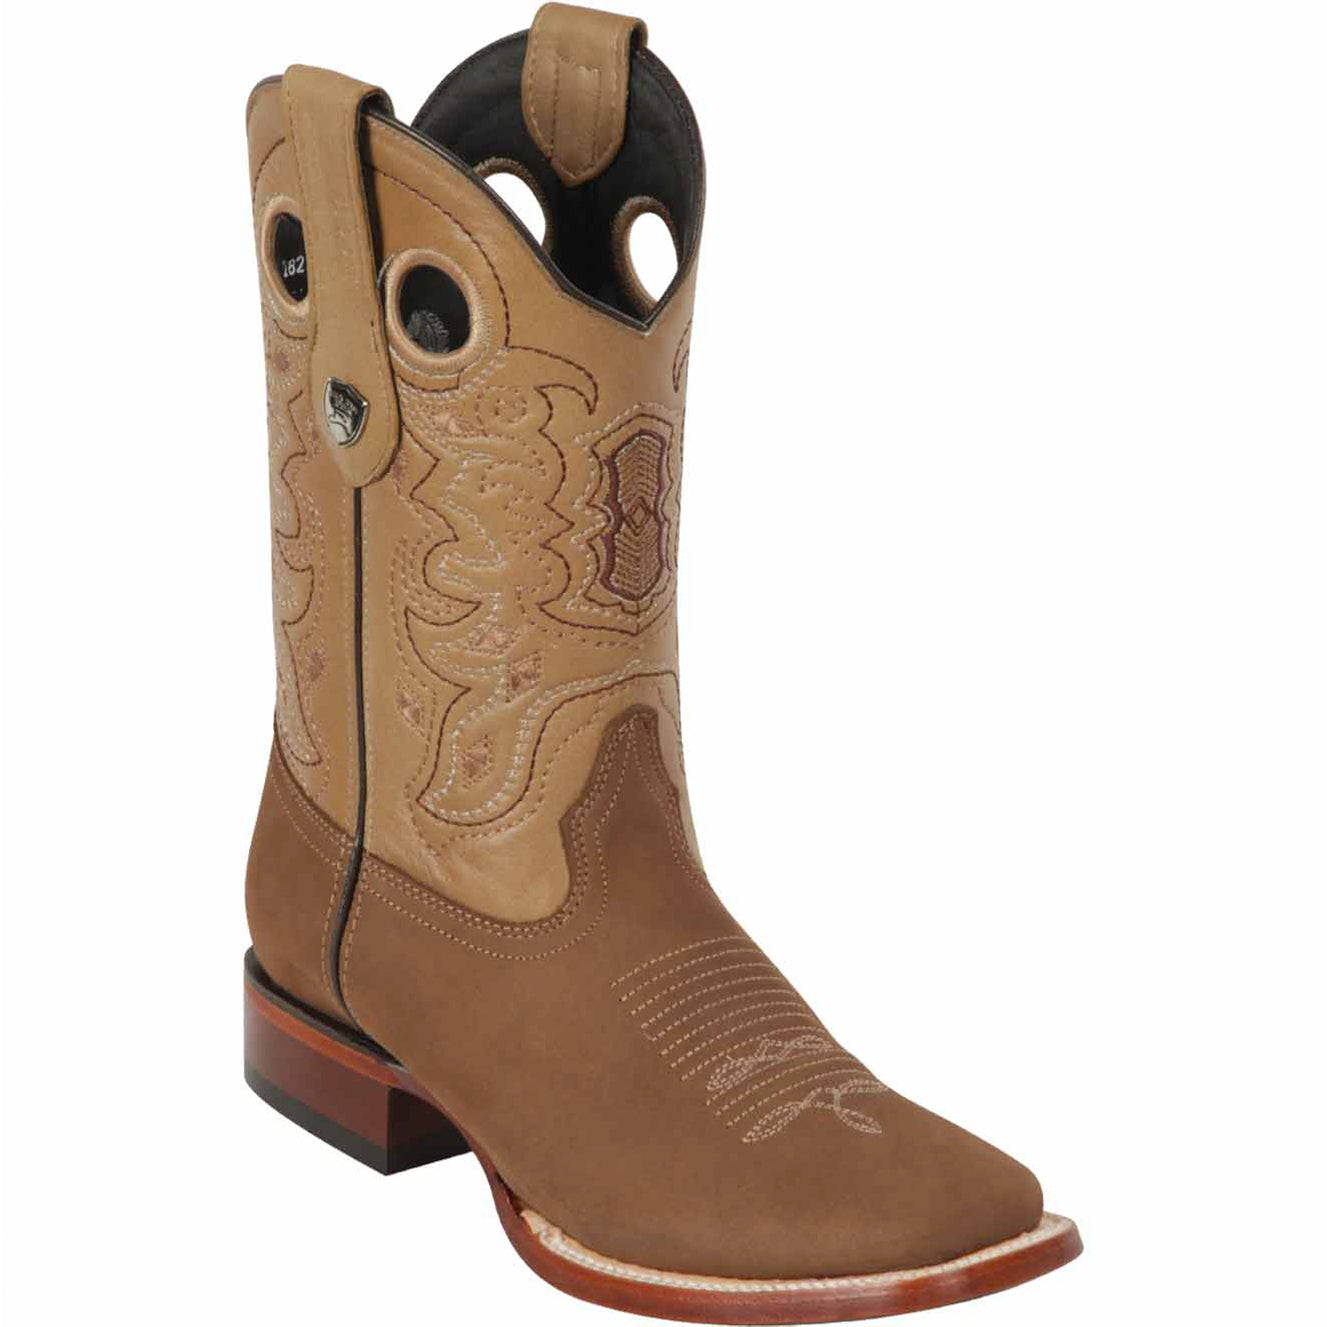 Canada West Bullrider Grand Canyon Pointed Toe Cowboy Boot 6903 - Width 3E